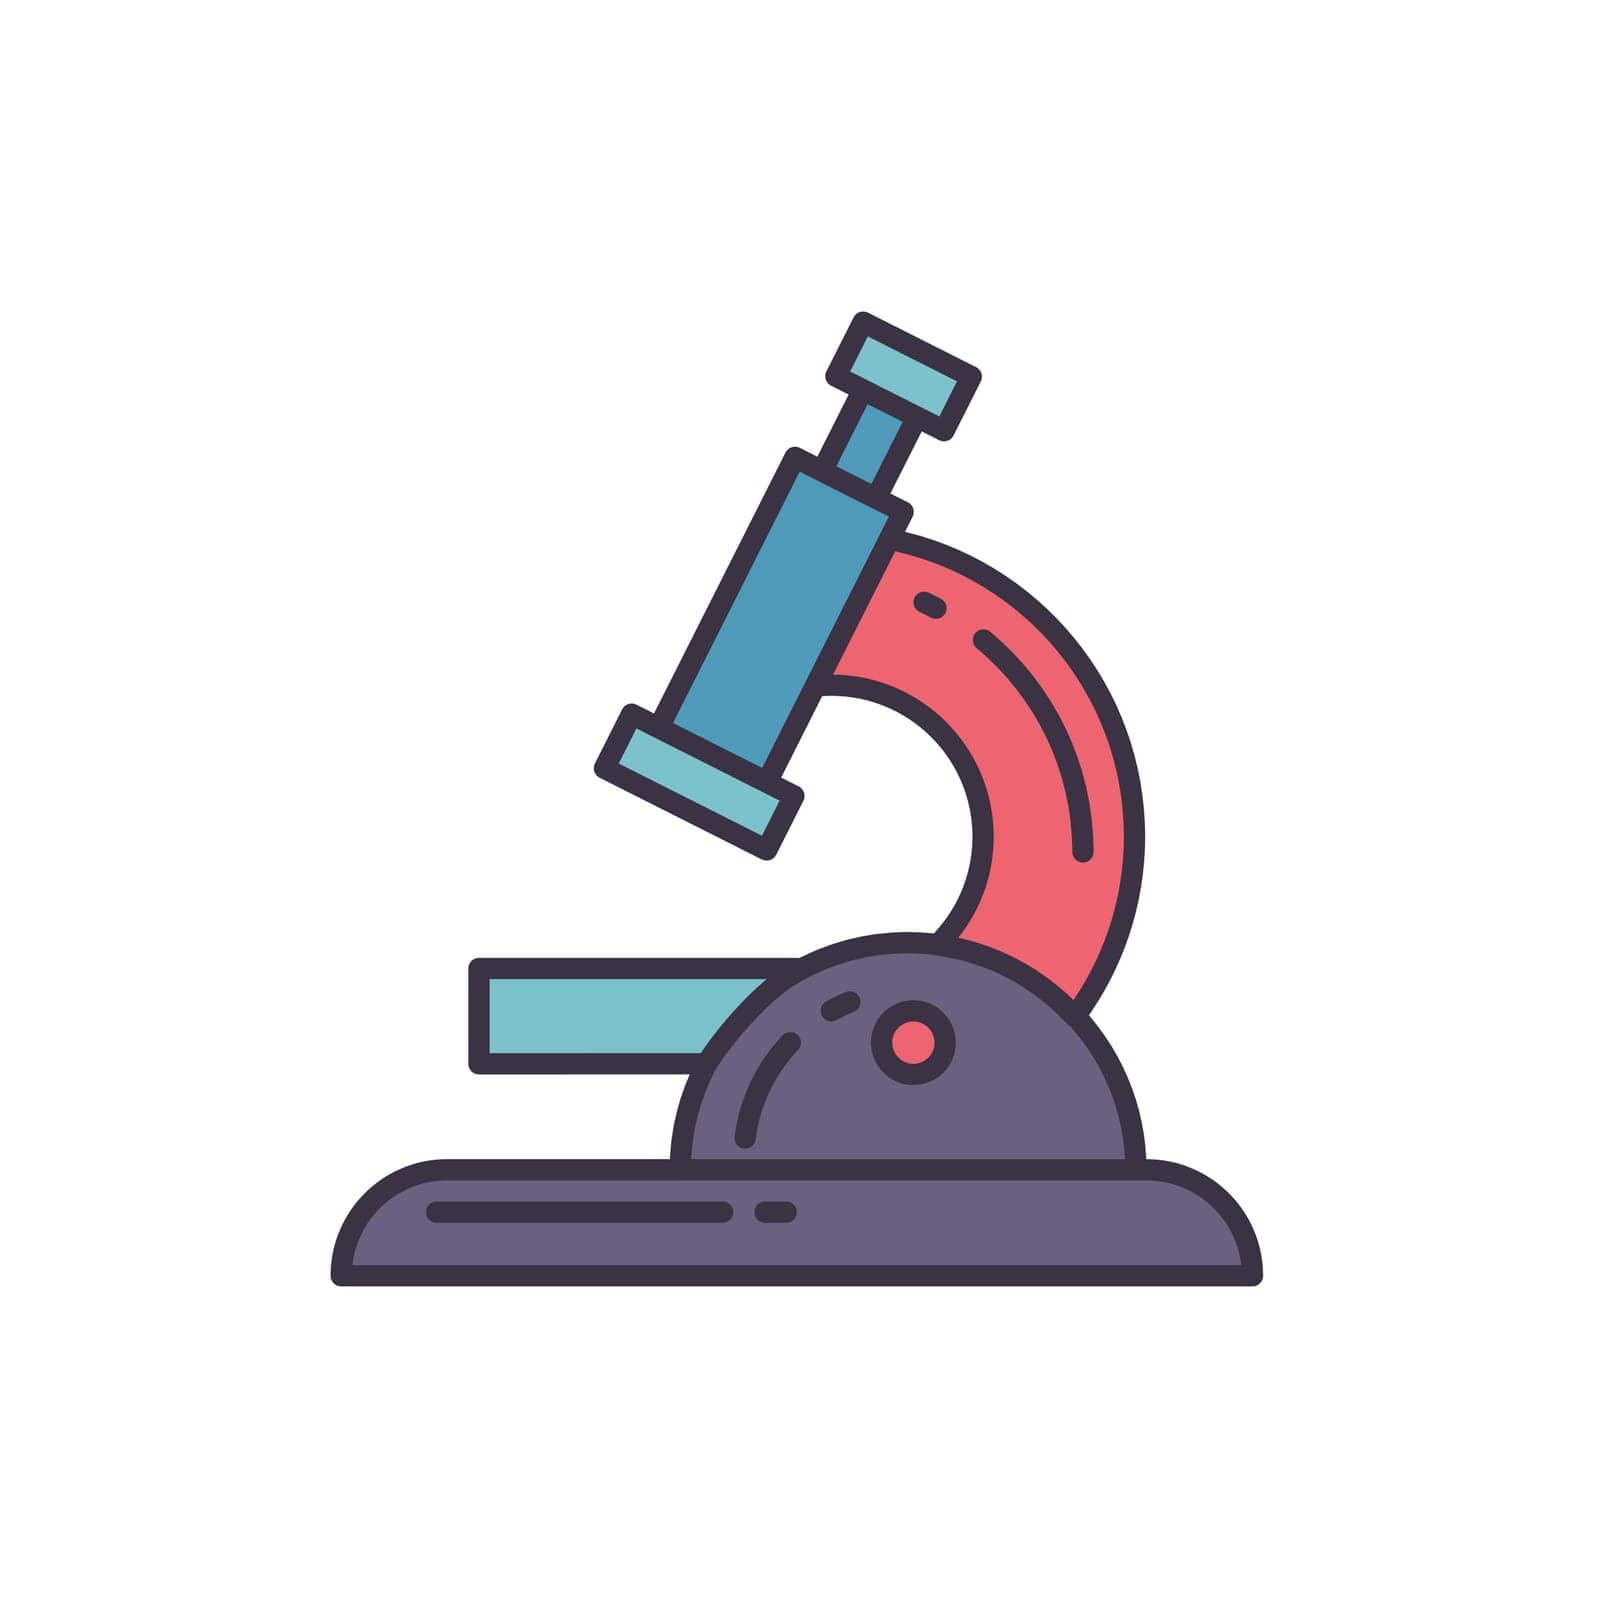 Microscope related vector icon. by smoki